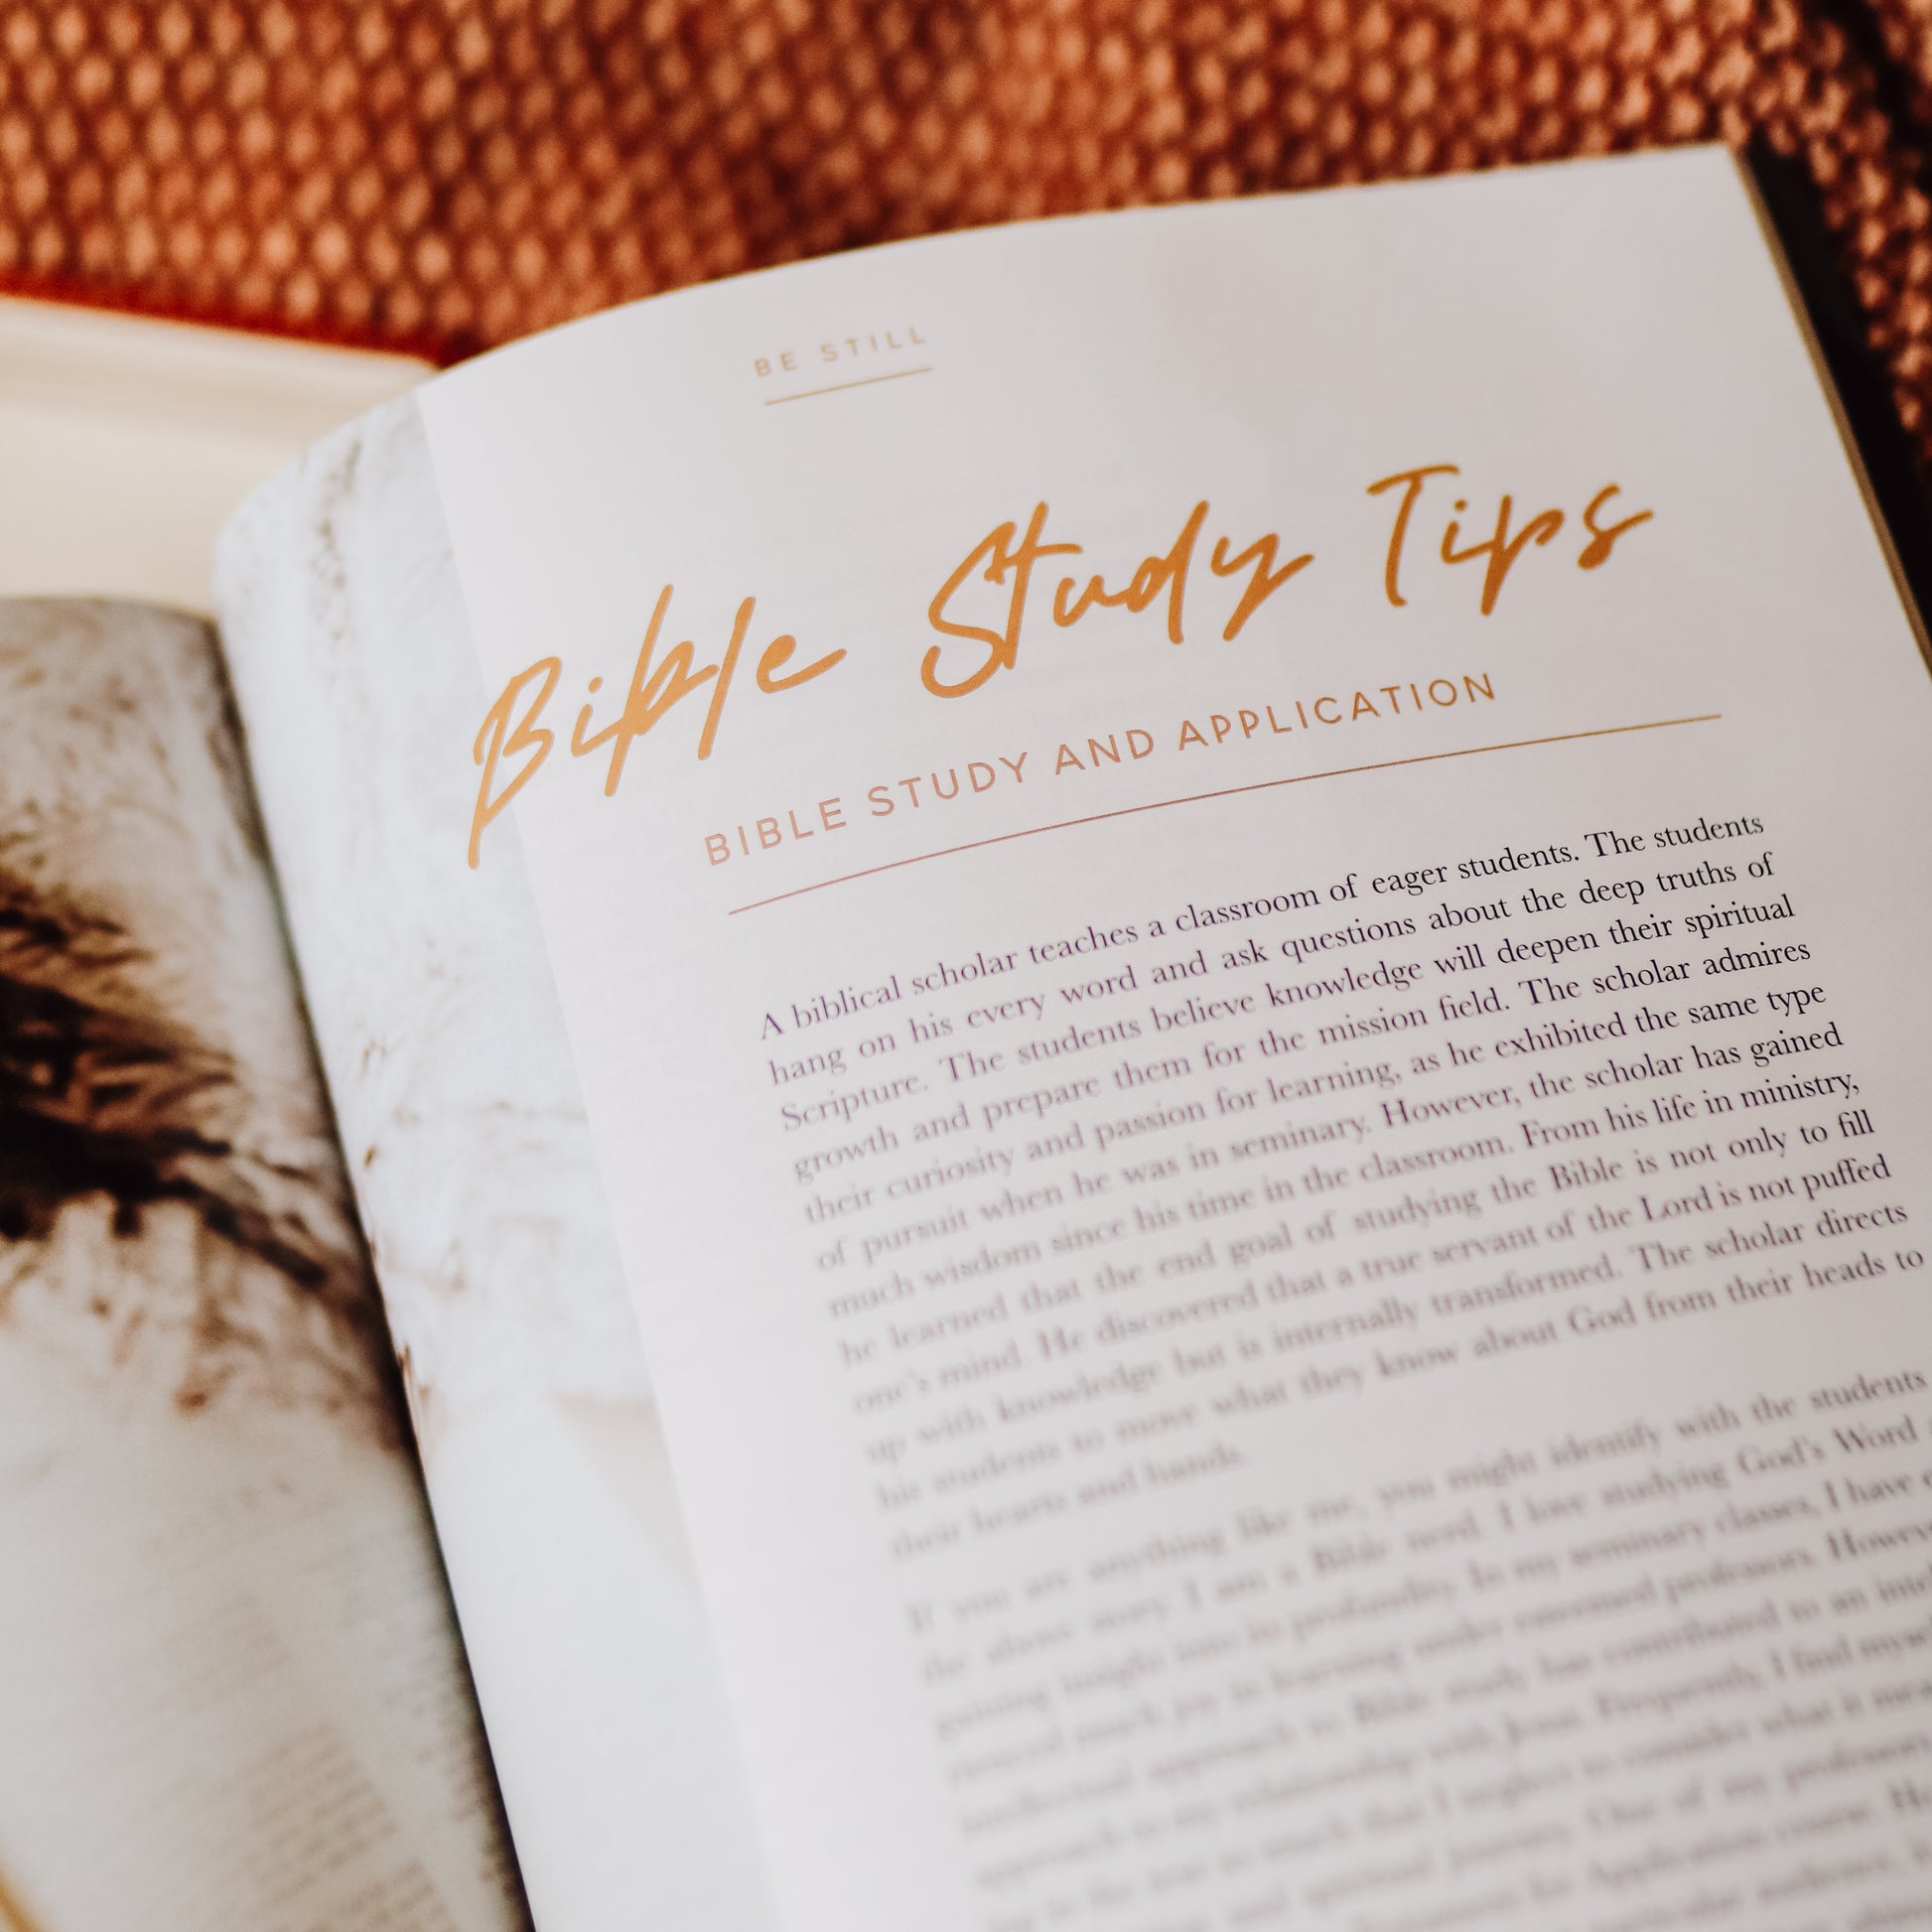 Be Still Magazine Subscription – The Daily Grace Co.